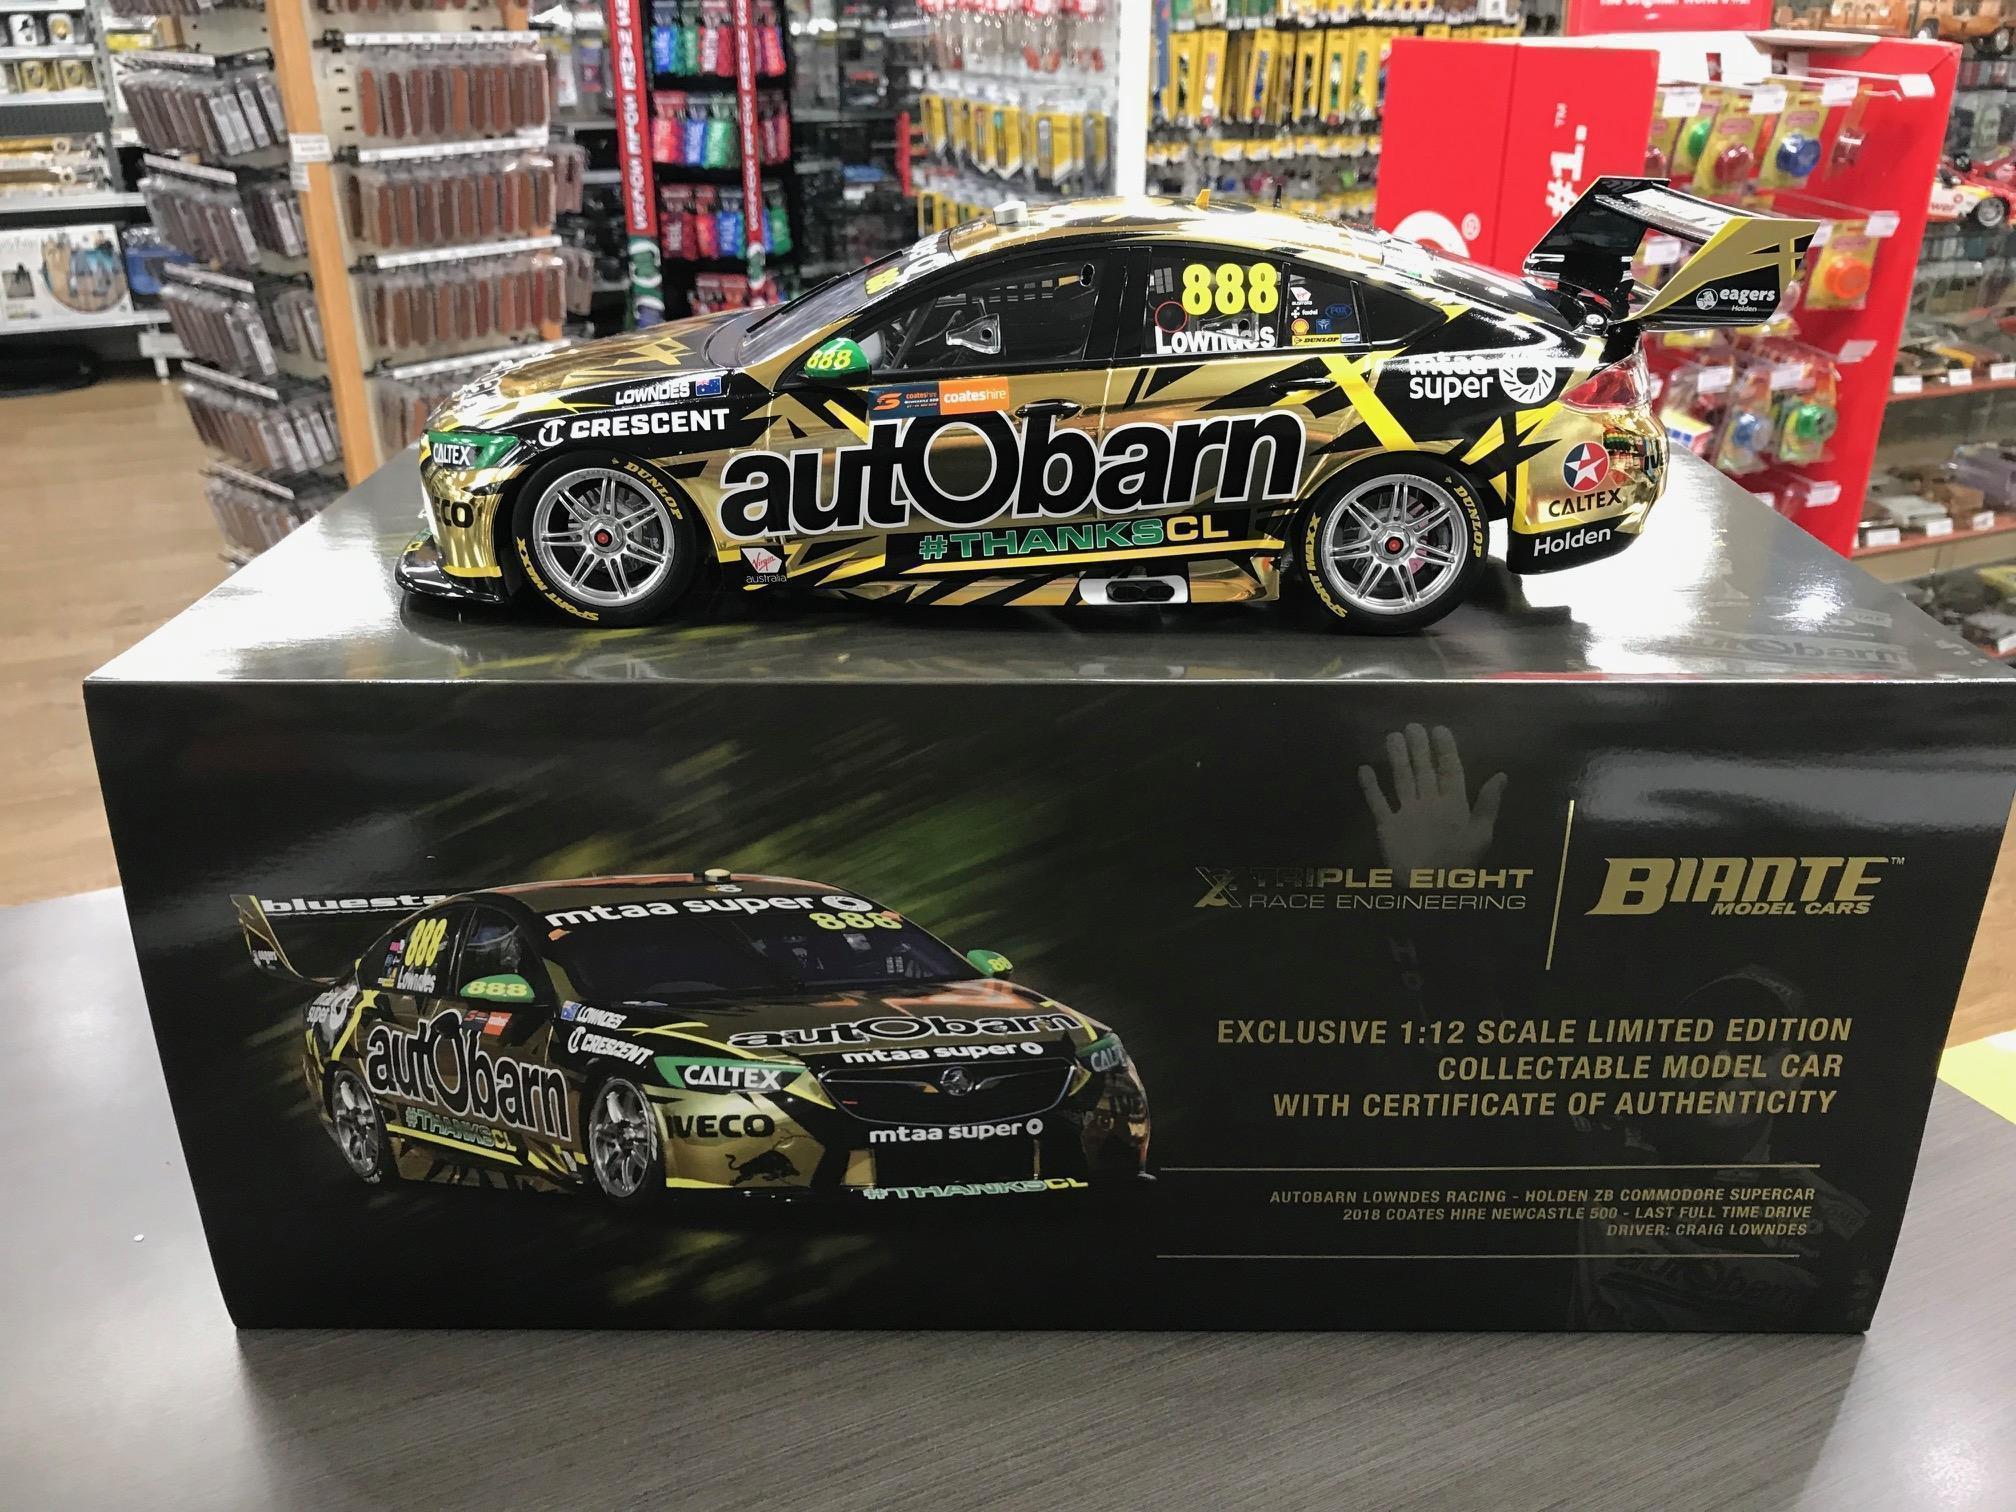 2018 Craig Lowndes Final Race Newcastle 500 Autobarn Holden ZB Commodore 1:12 Scale Model Car